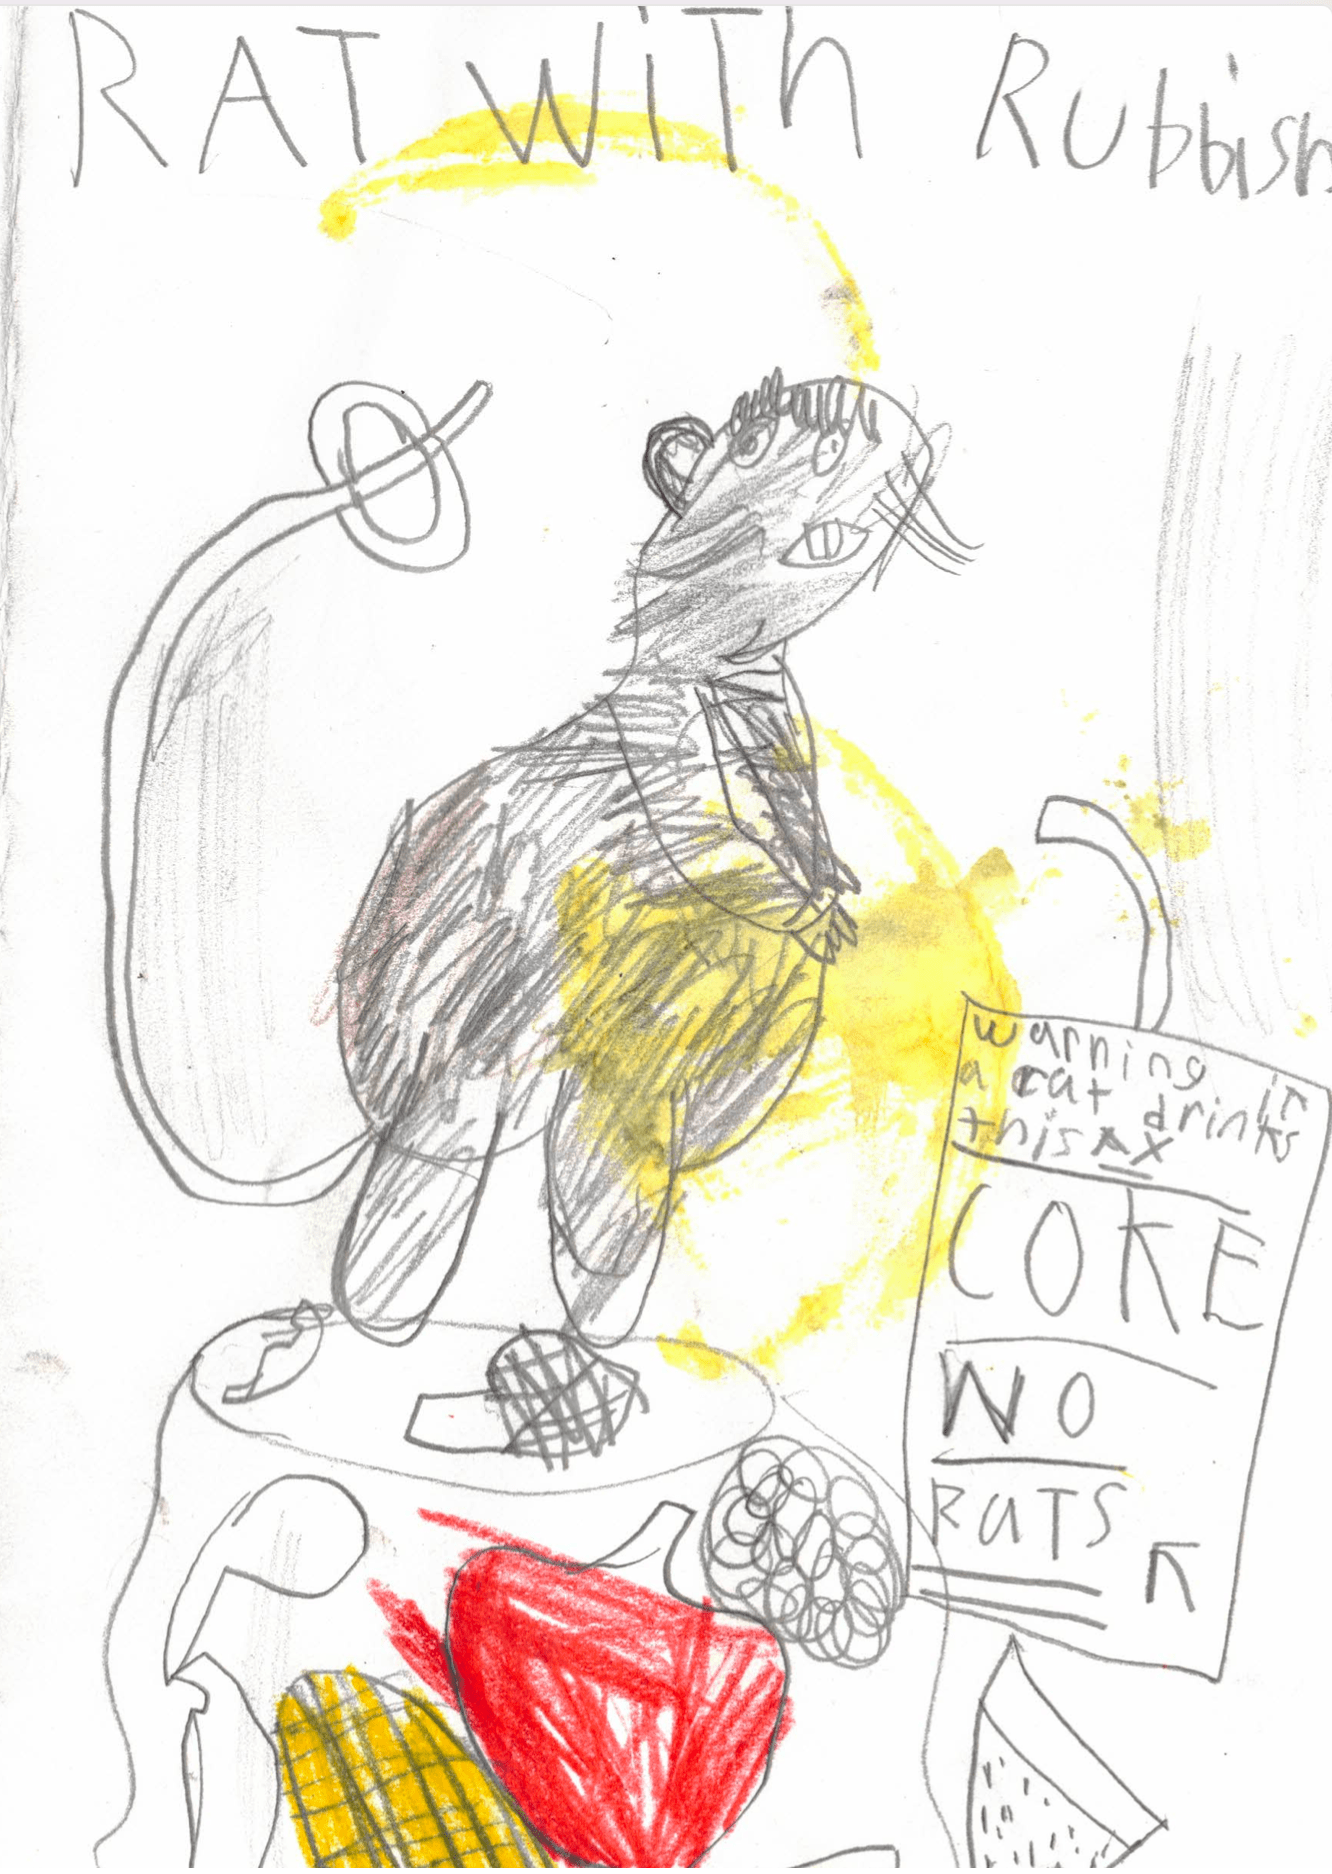 Rosewood+Calder "Rat with Rubbish" pencil with accents of yellow and red colorful crayon, the rat sits perched atop a food heap